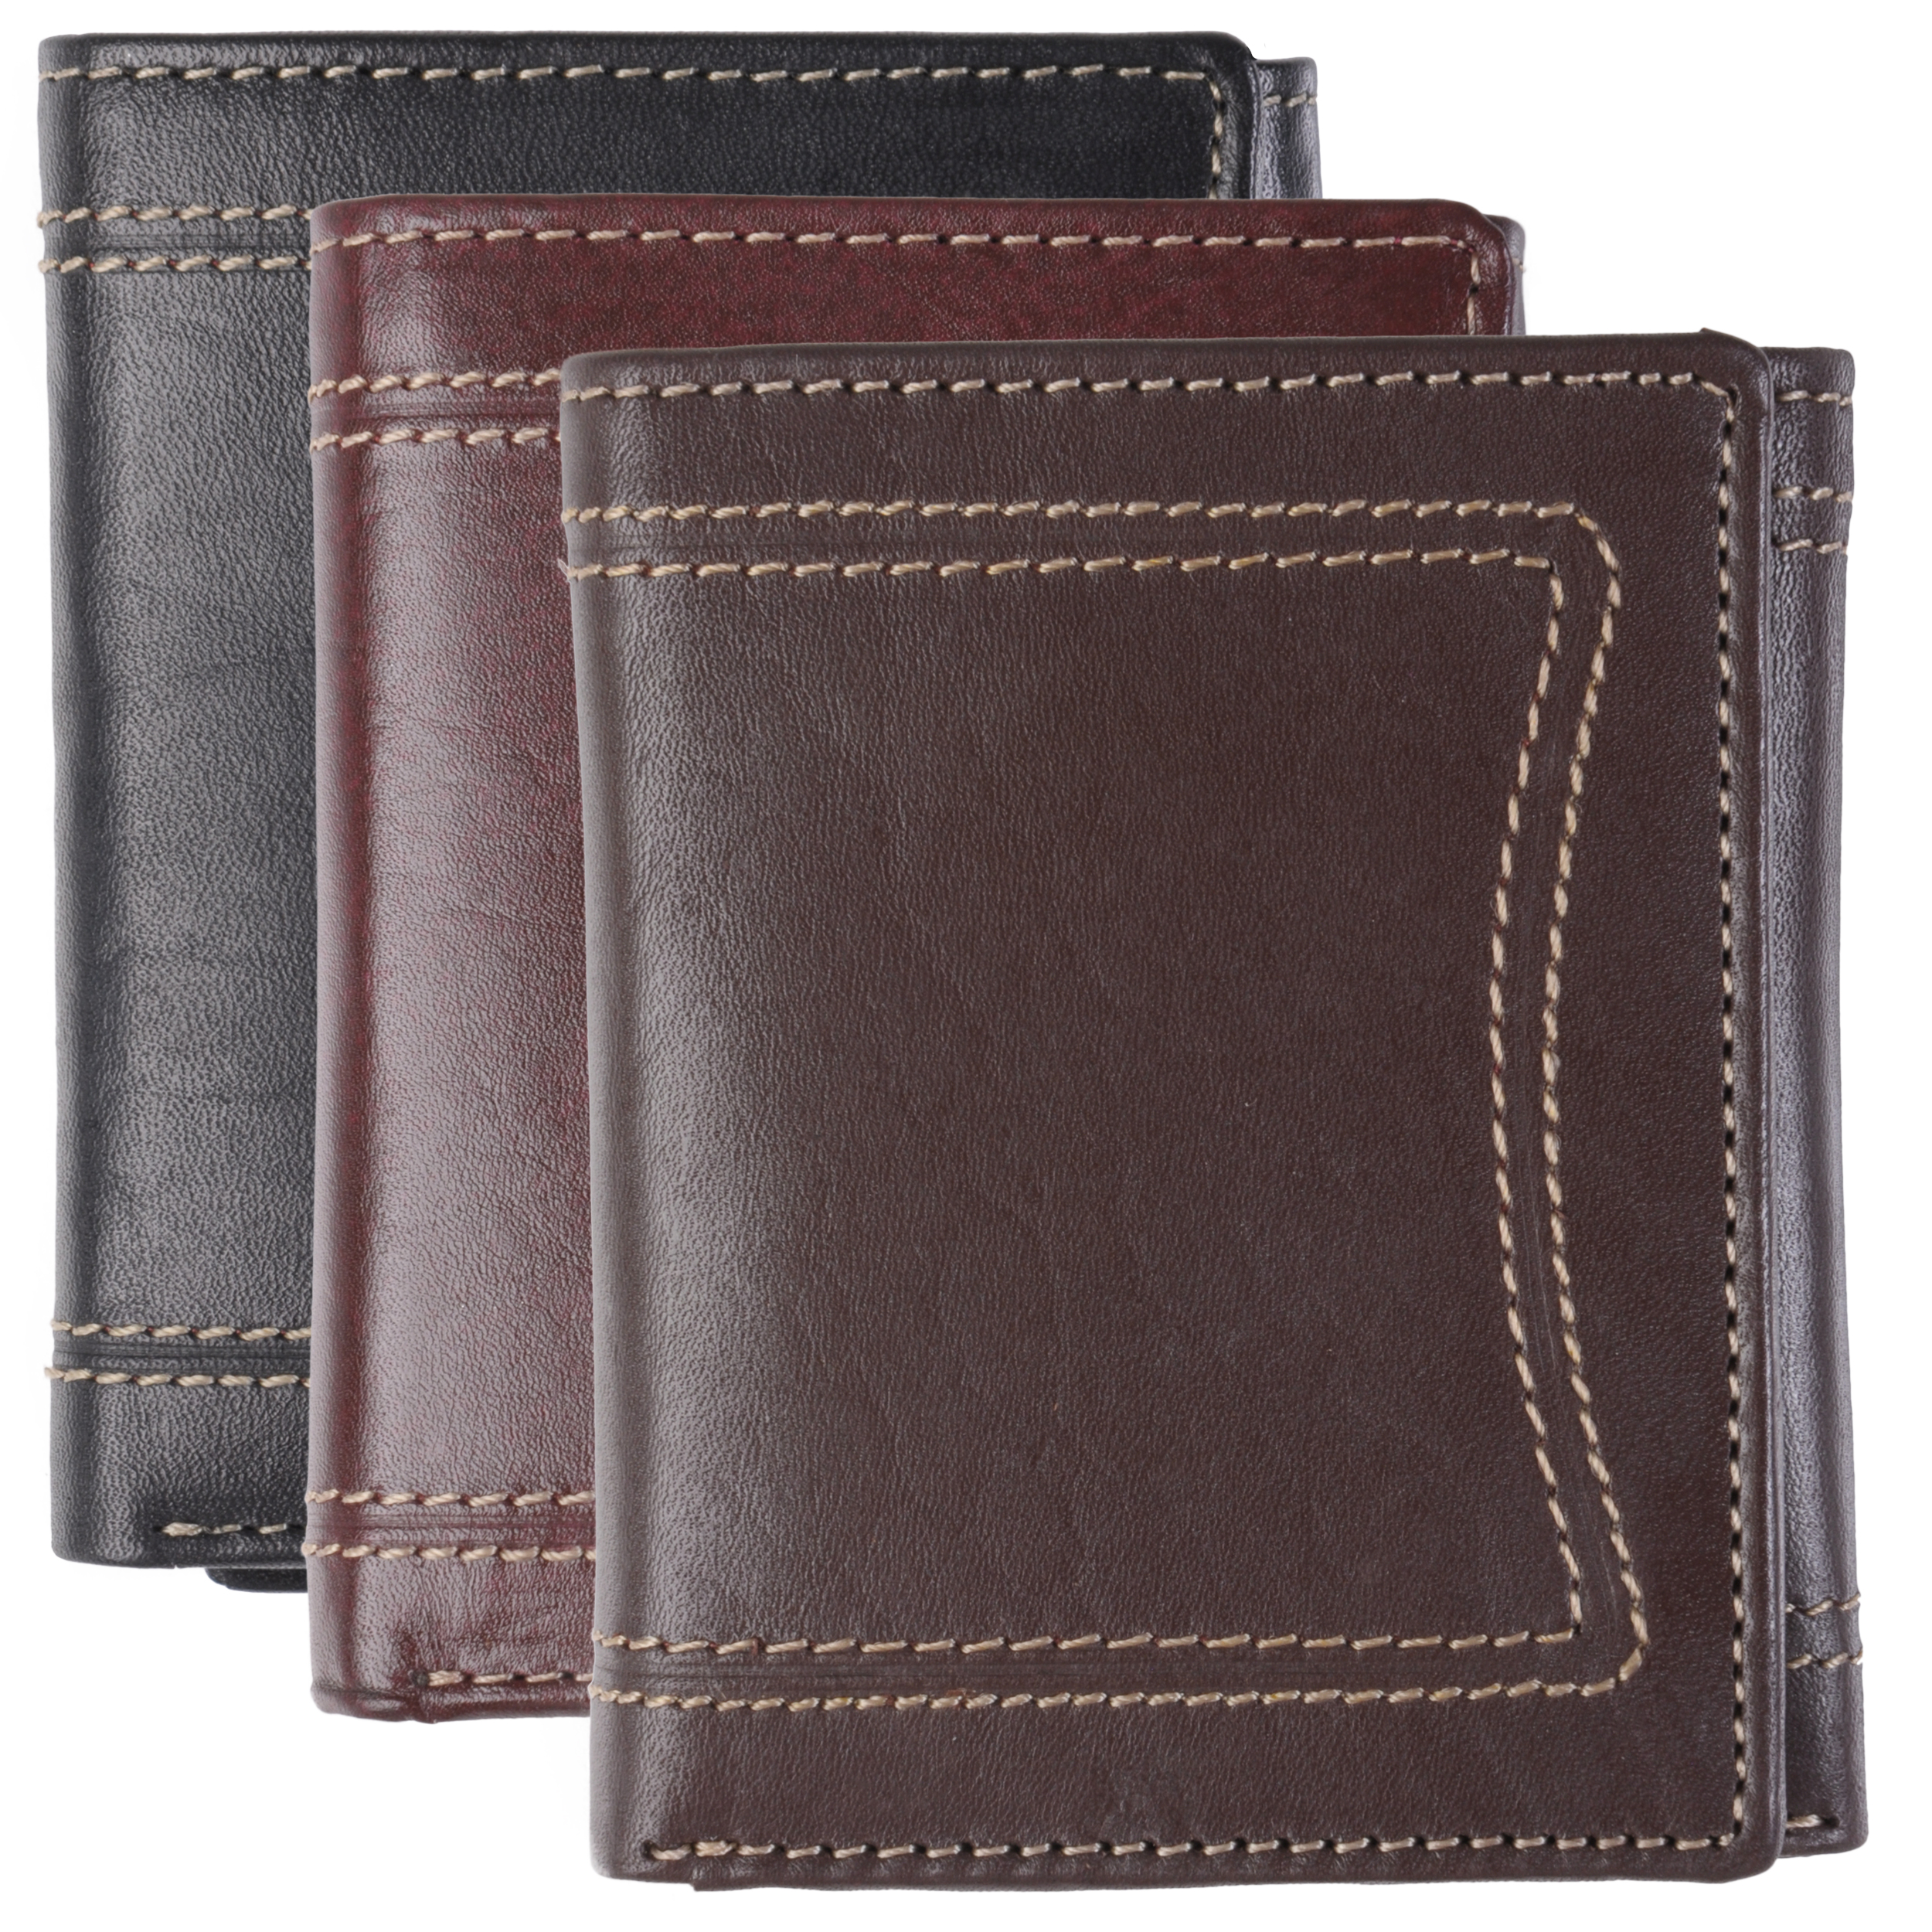 Daxx Mens Topstitched Tri-fold Genuine Leather Wallet